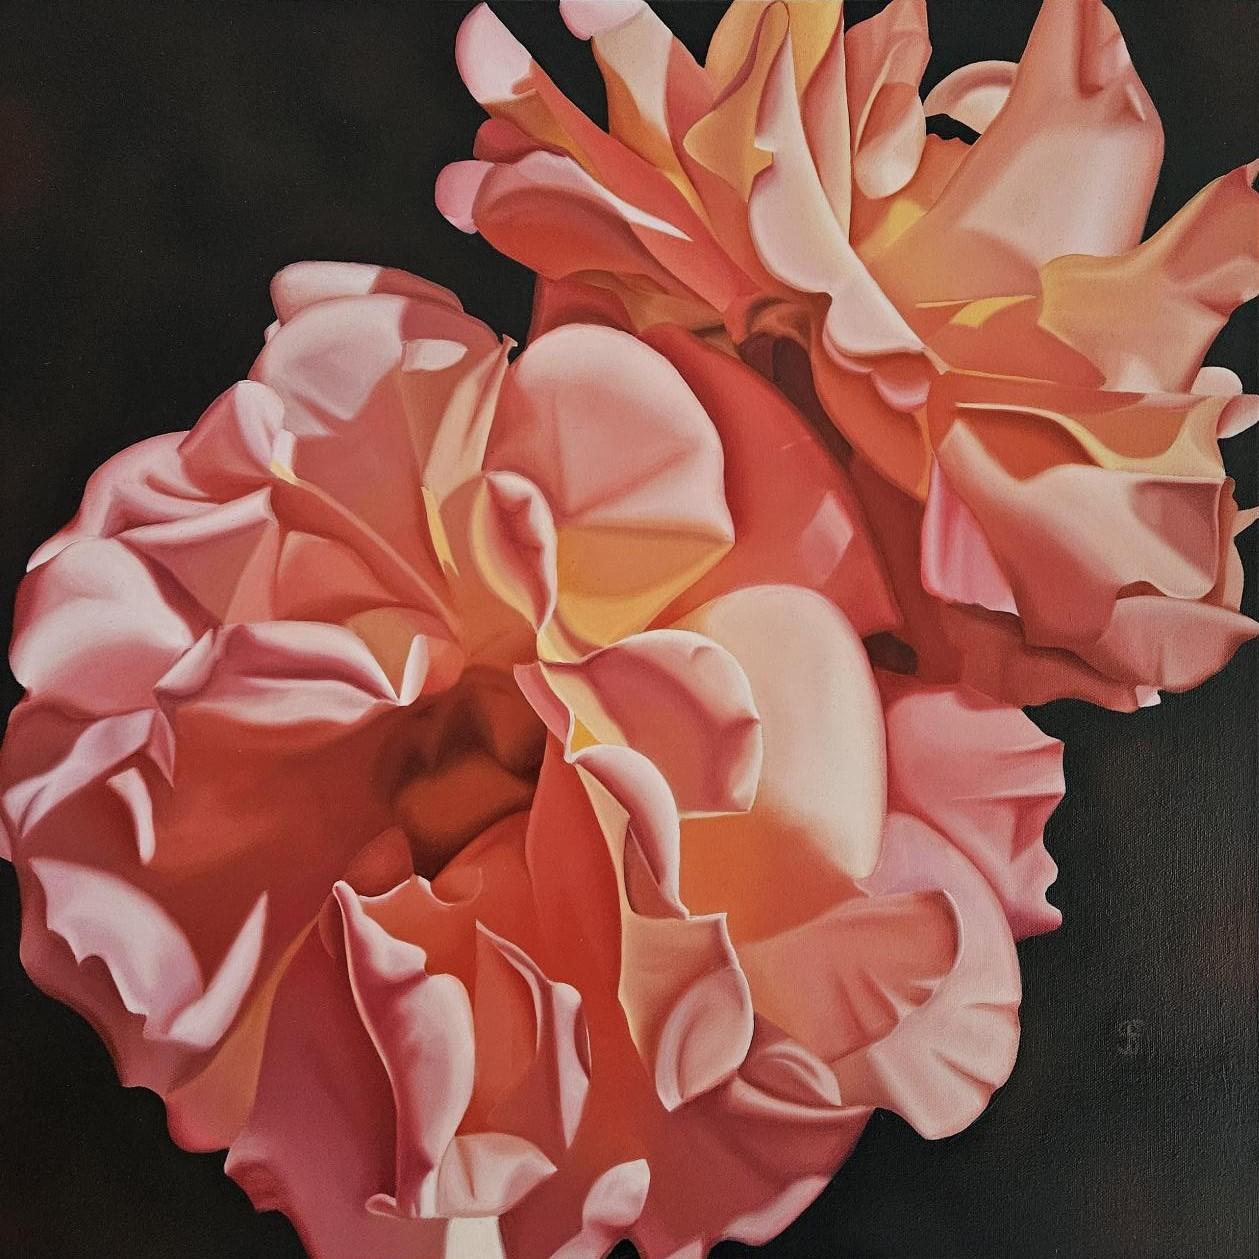 Tuti Fruiti - contemporary hyperrealistic flower rose oil painting - Painting by Steve Foster